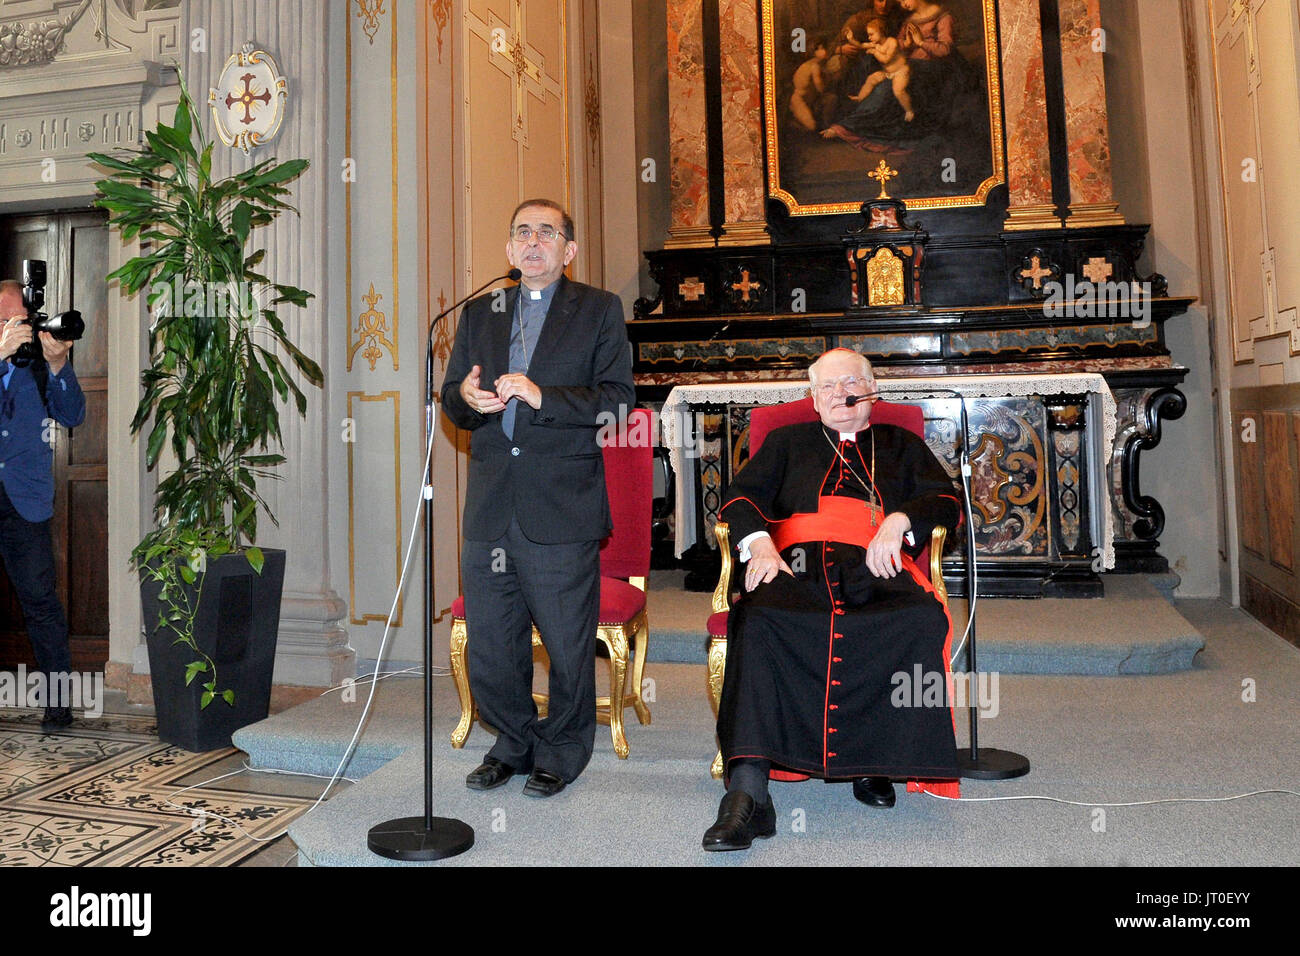 Presentation of Mario Delpini as the new Archbishop of Milan, succeeding Cardinal Angelo Scola.  Featuring: Mario Delpini, Angelo Scola Where: Milan, Lombardy, Italy When: 07 Jul 2017 Credit: IPA/WENN.com  **Only available for publication in UK, USA, Germany, Austria, Switzerland** Stock Photo